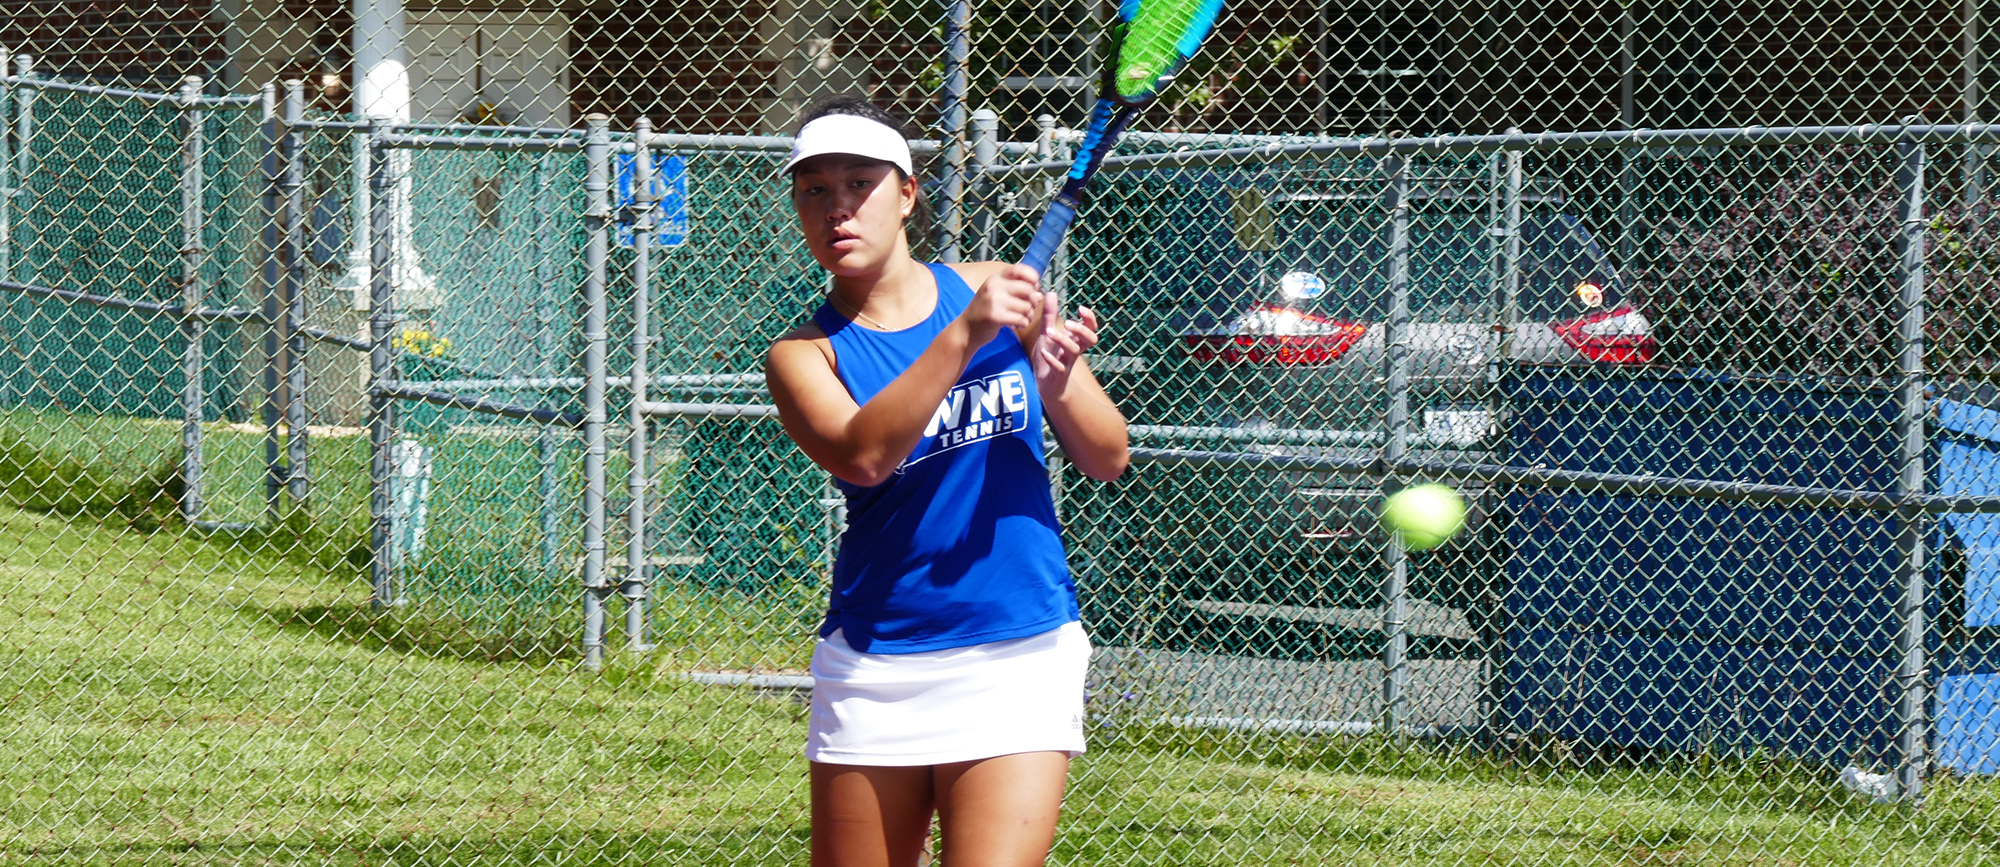 Junior Maylene LaPress earned wins in both singles and doubles play on Sunday as the Golden Bears defeated Sage, 7-2. (Photo by Ann King)